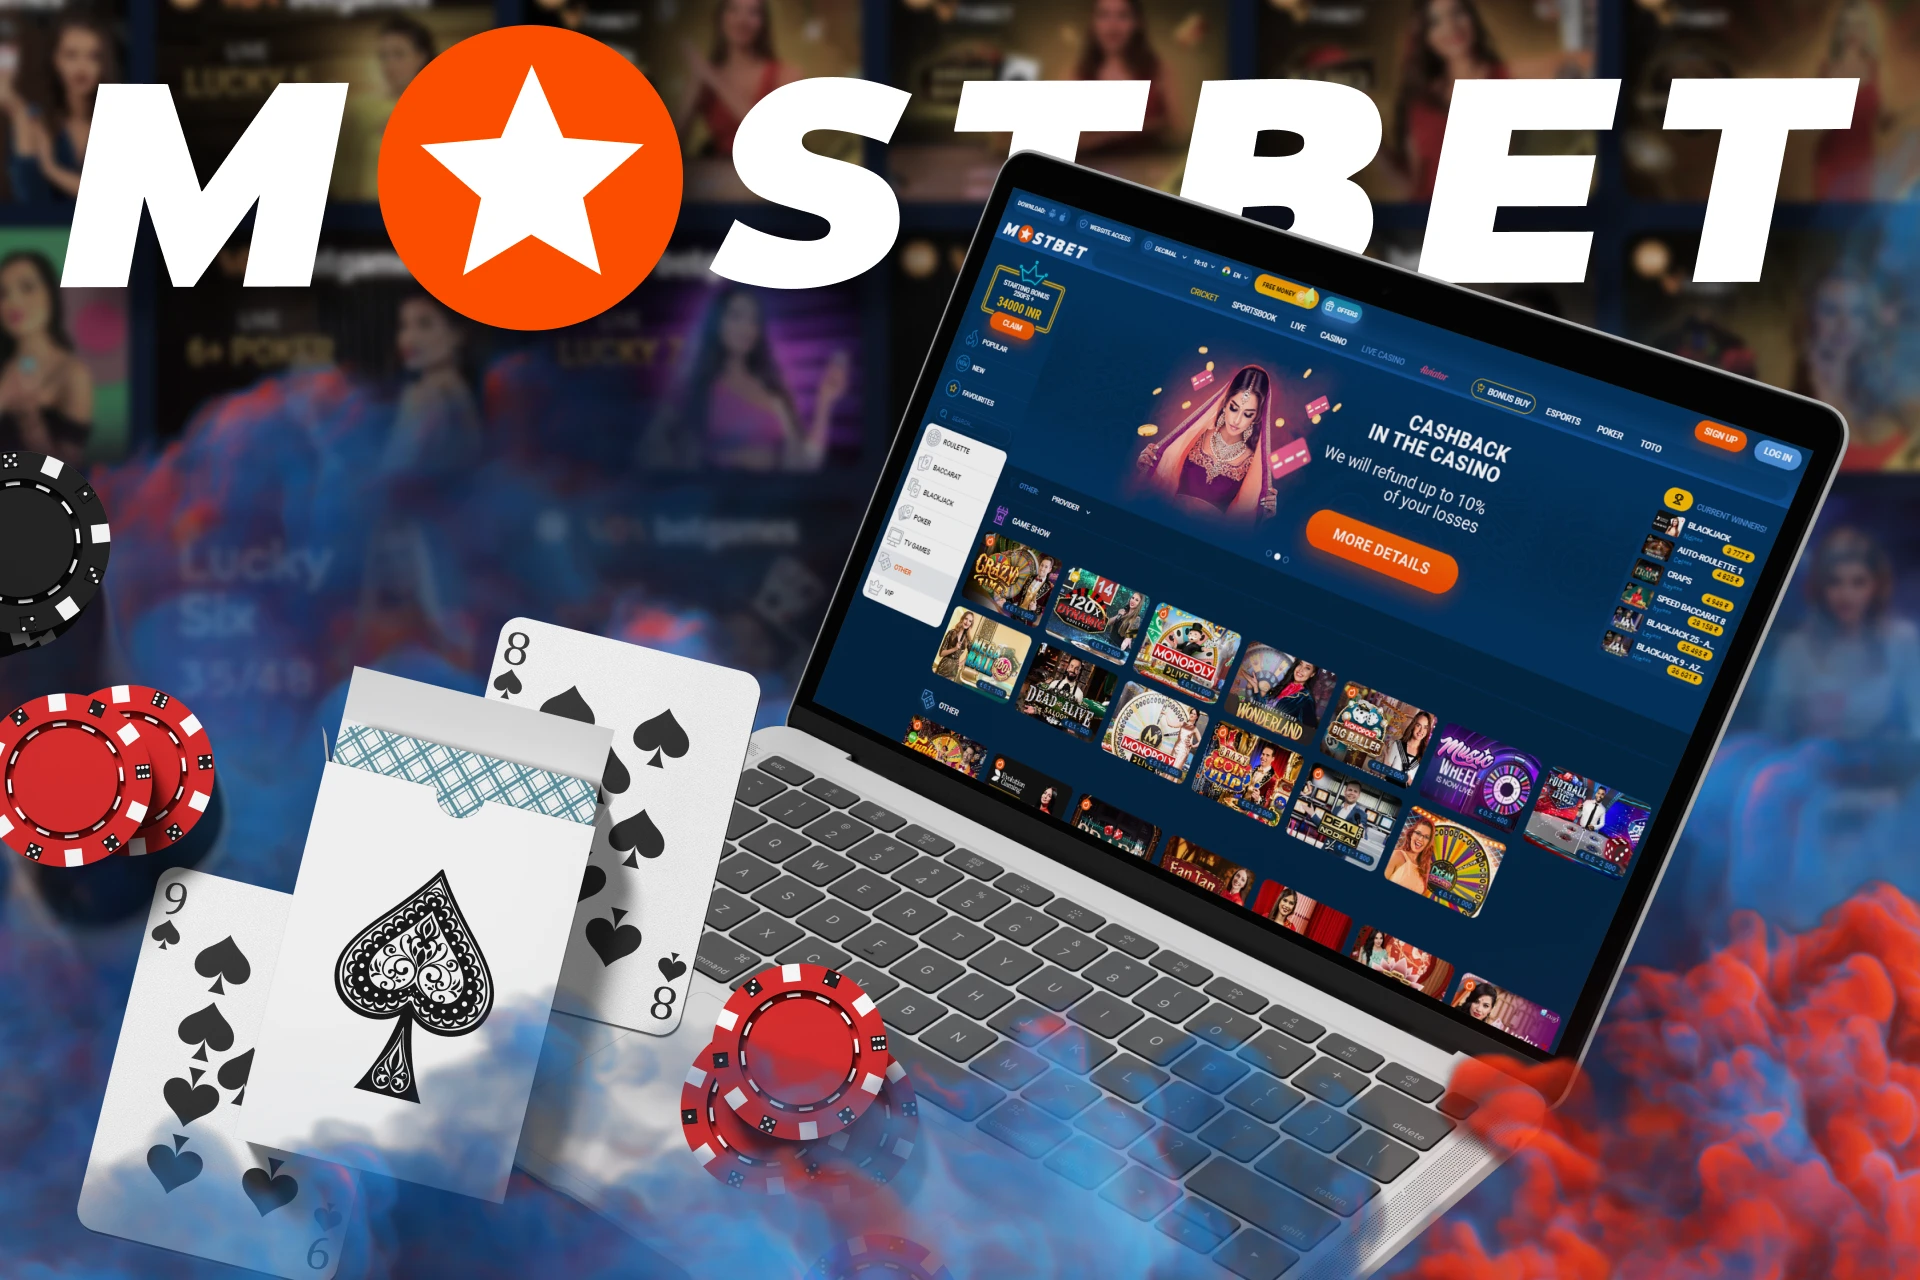 At Mostbet, you can play other games in addition to TV games.